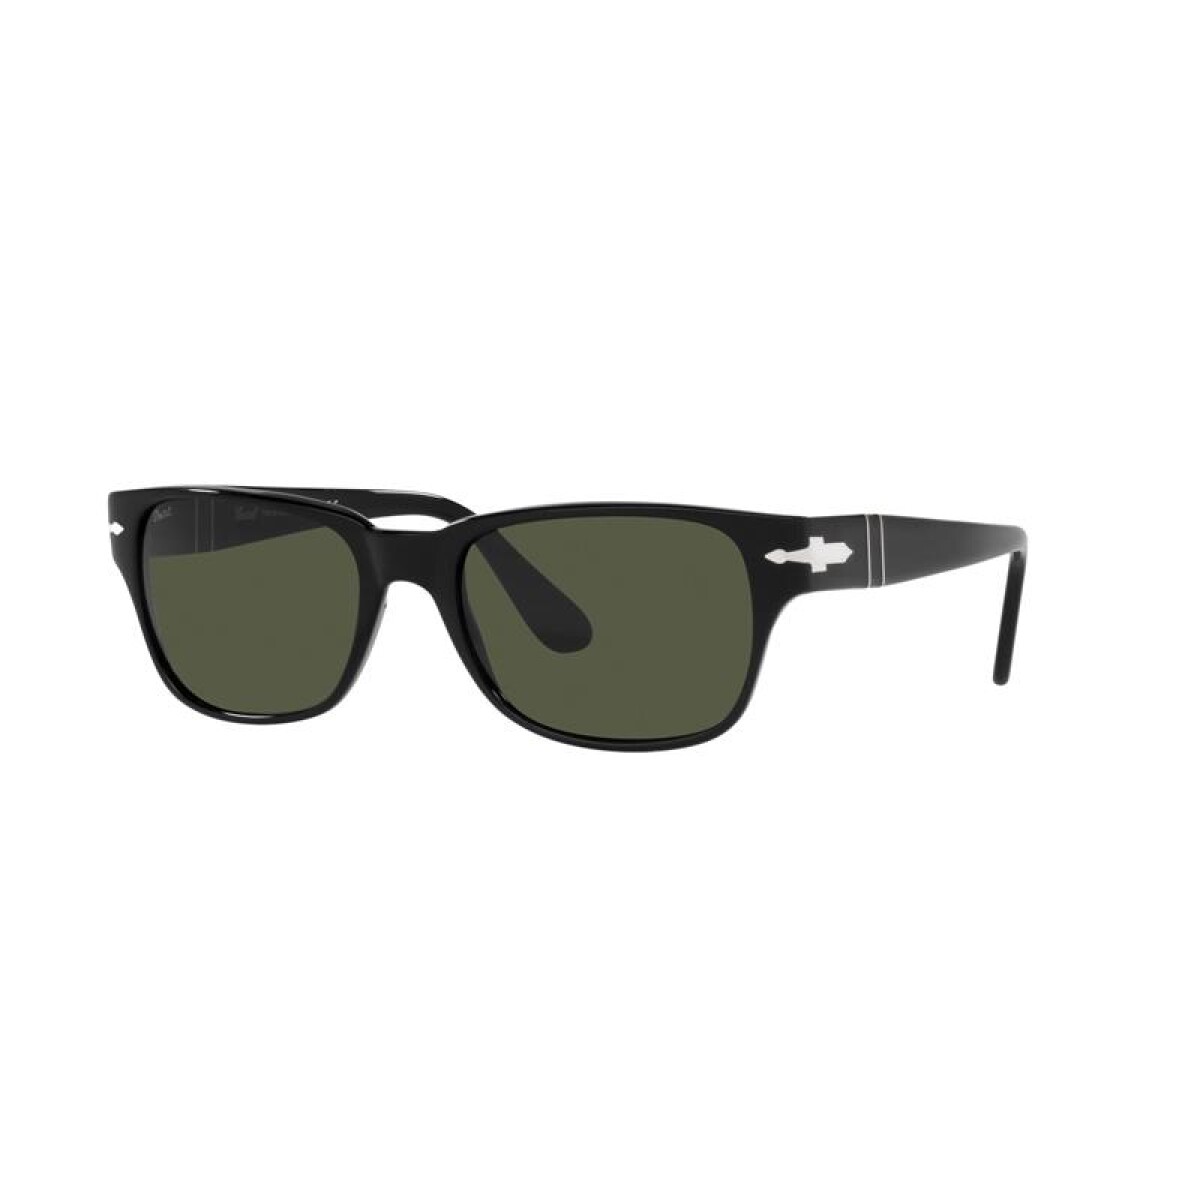 Persol 3288-s - 95/31 